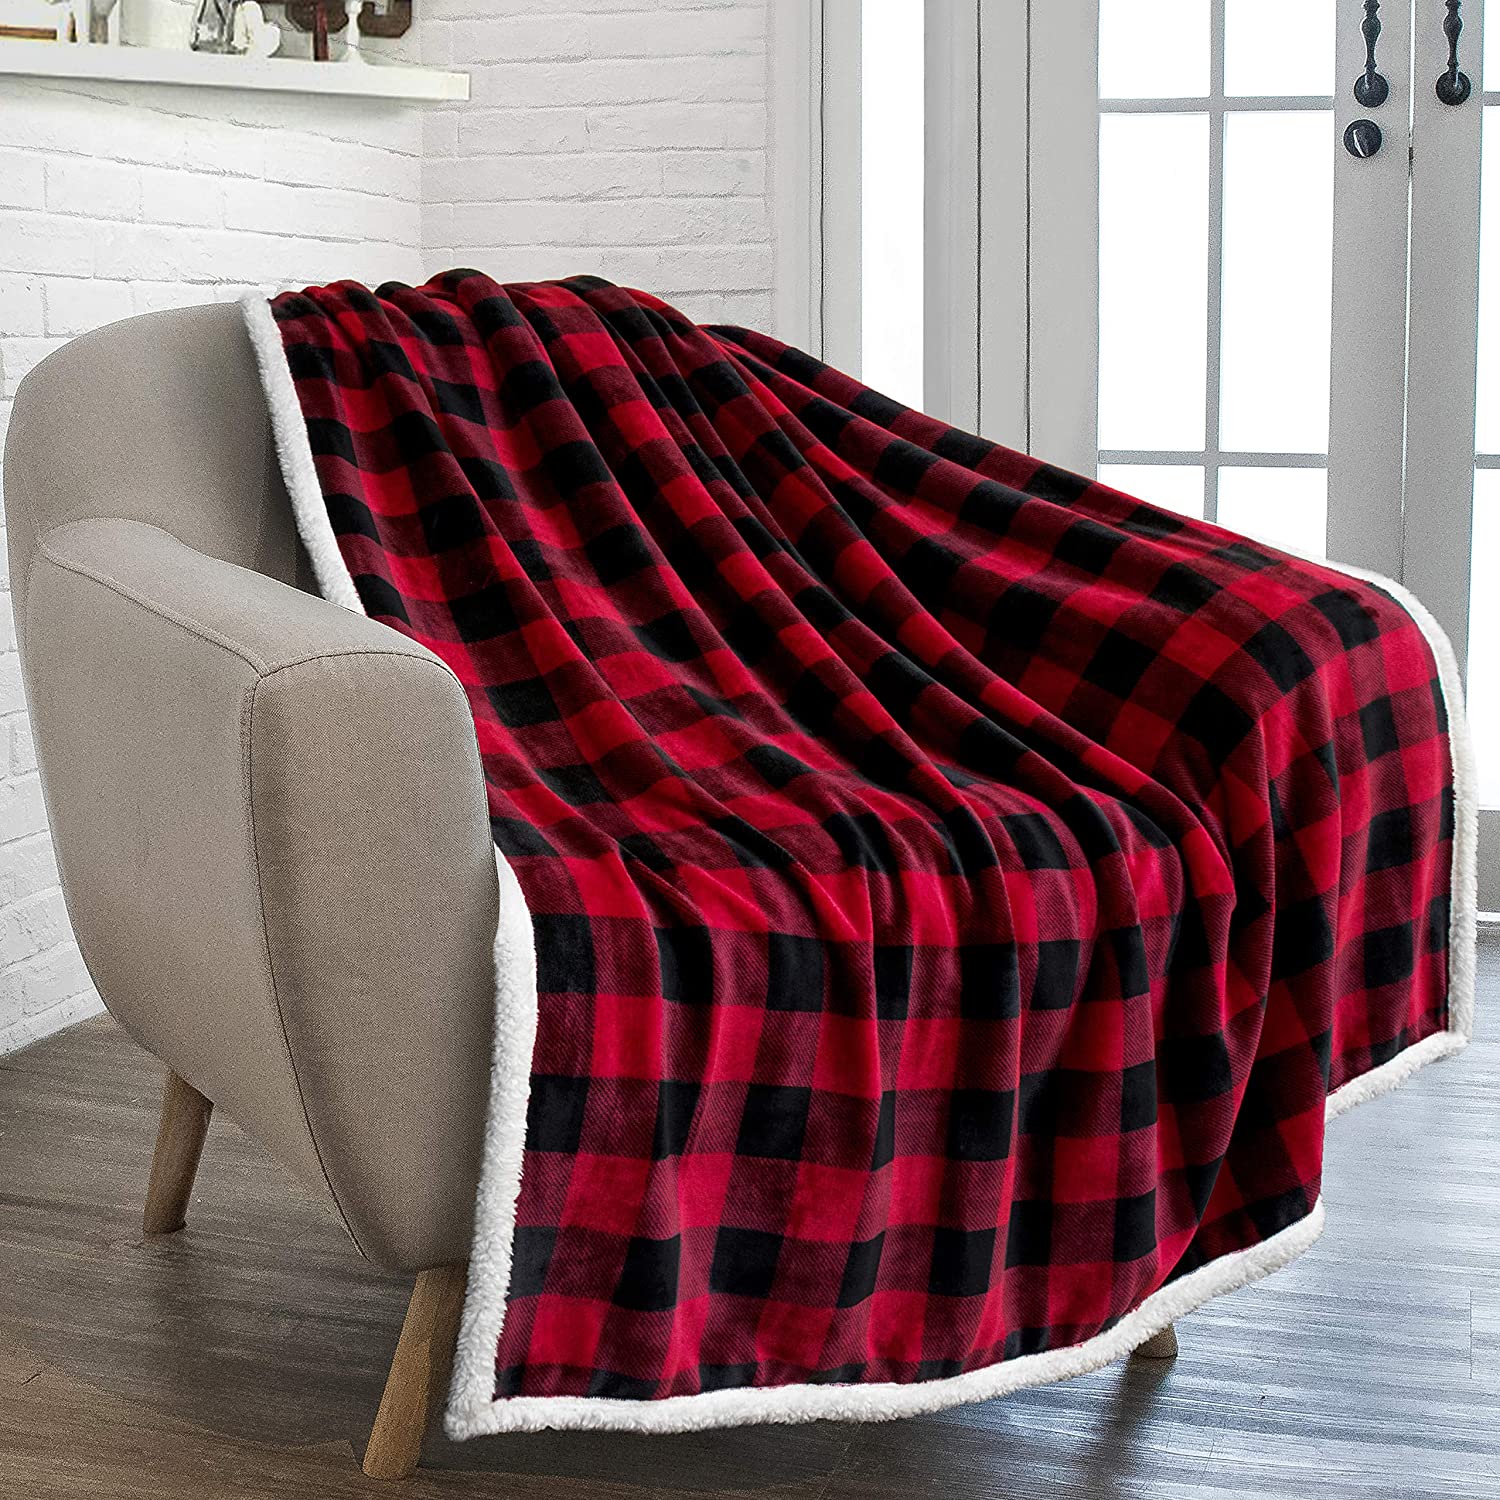 Red Black Plaid Luxurious Flannel Throw Blanket for Bedroom Living Room Sofa Couch Chair, Lightweight Warm Fleece